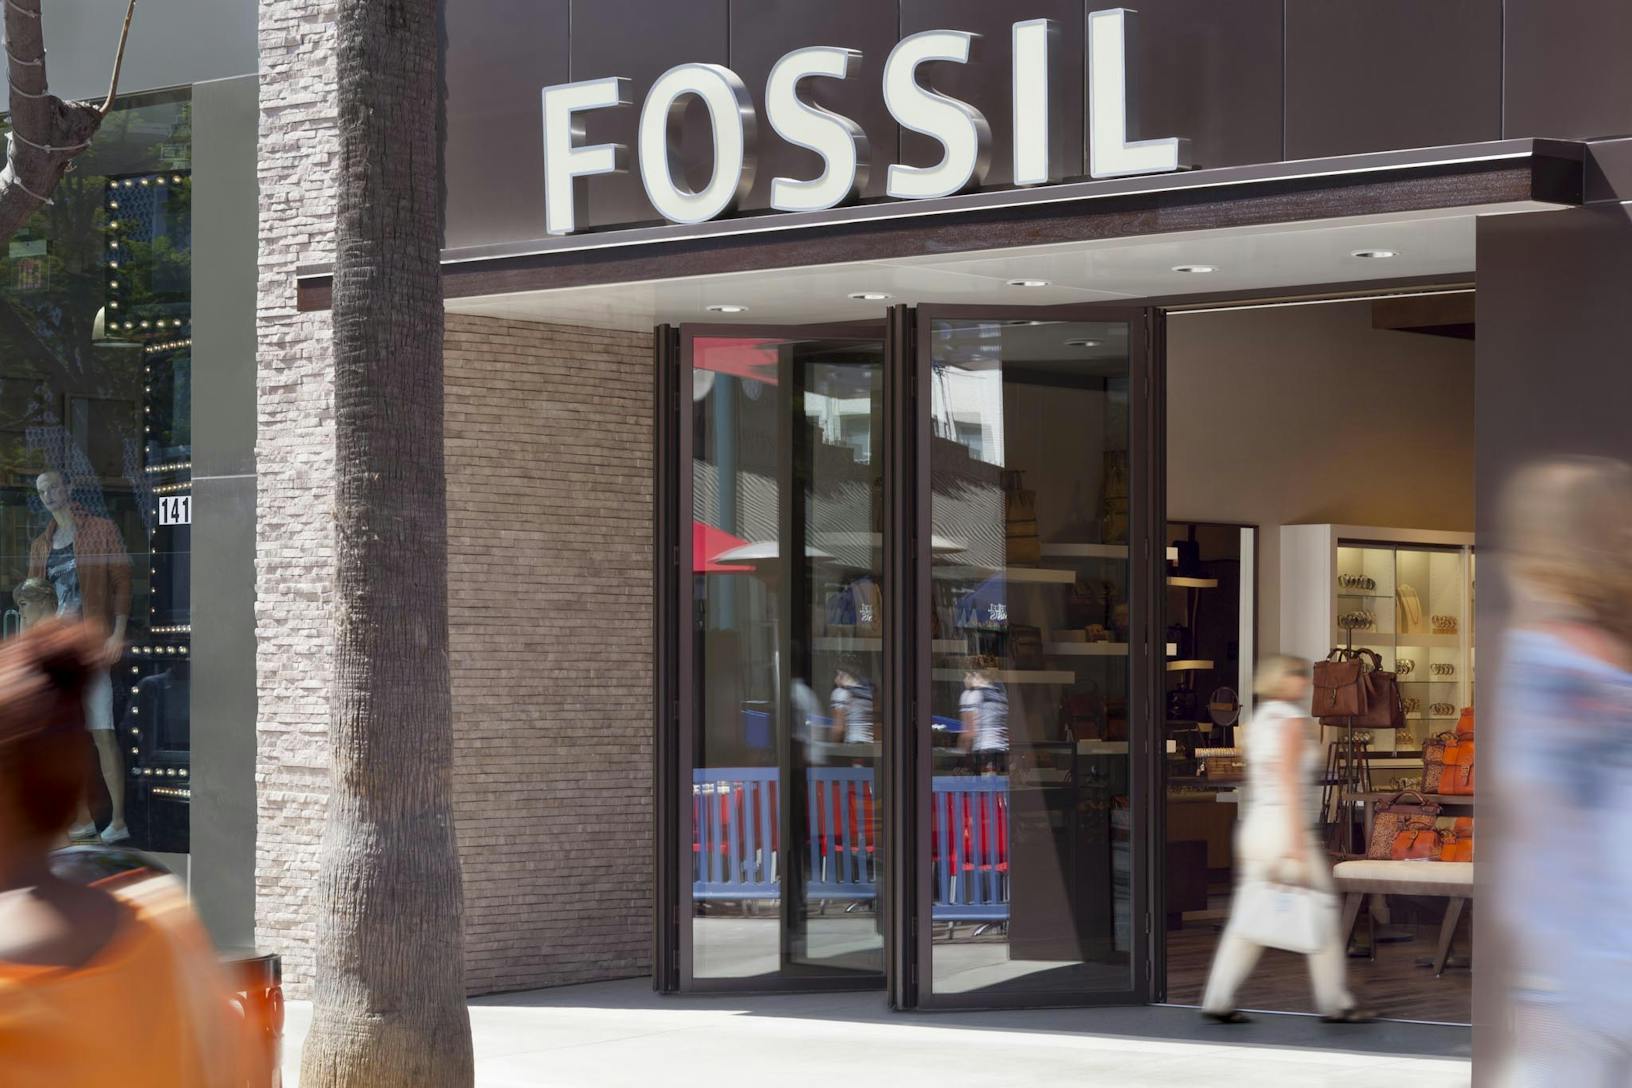 SL70 Retail Folding Entry Doors at the Fossil Store in Santa Monica, CA - Opening Exterior Day View